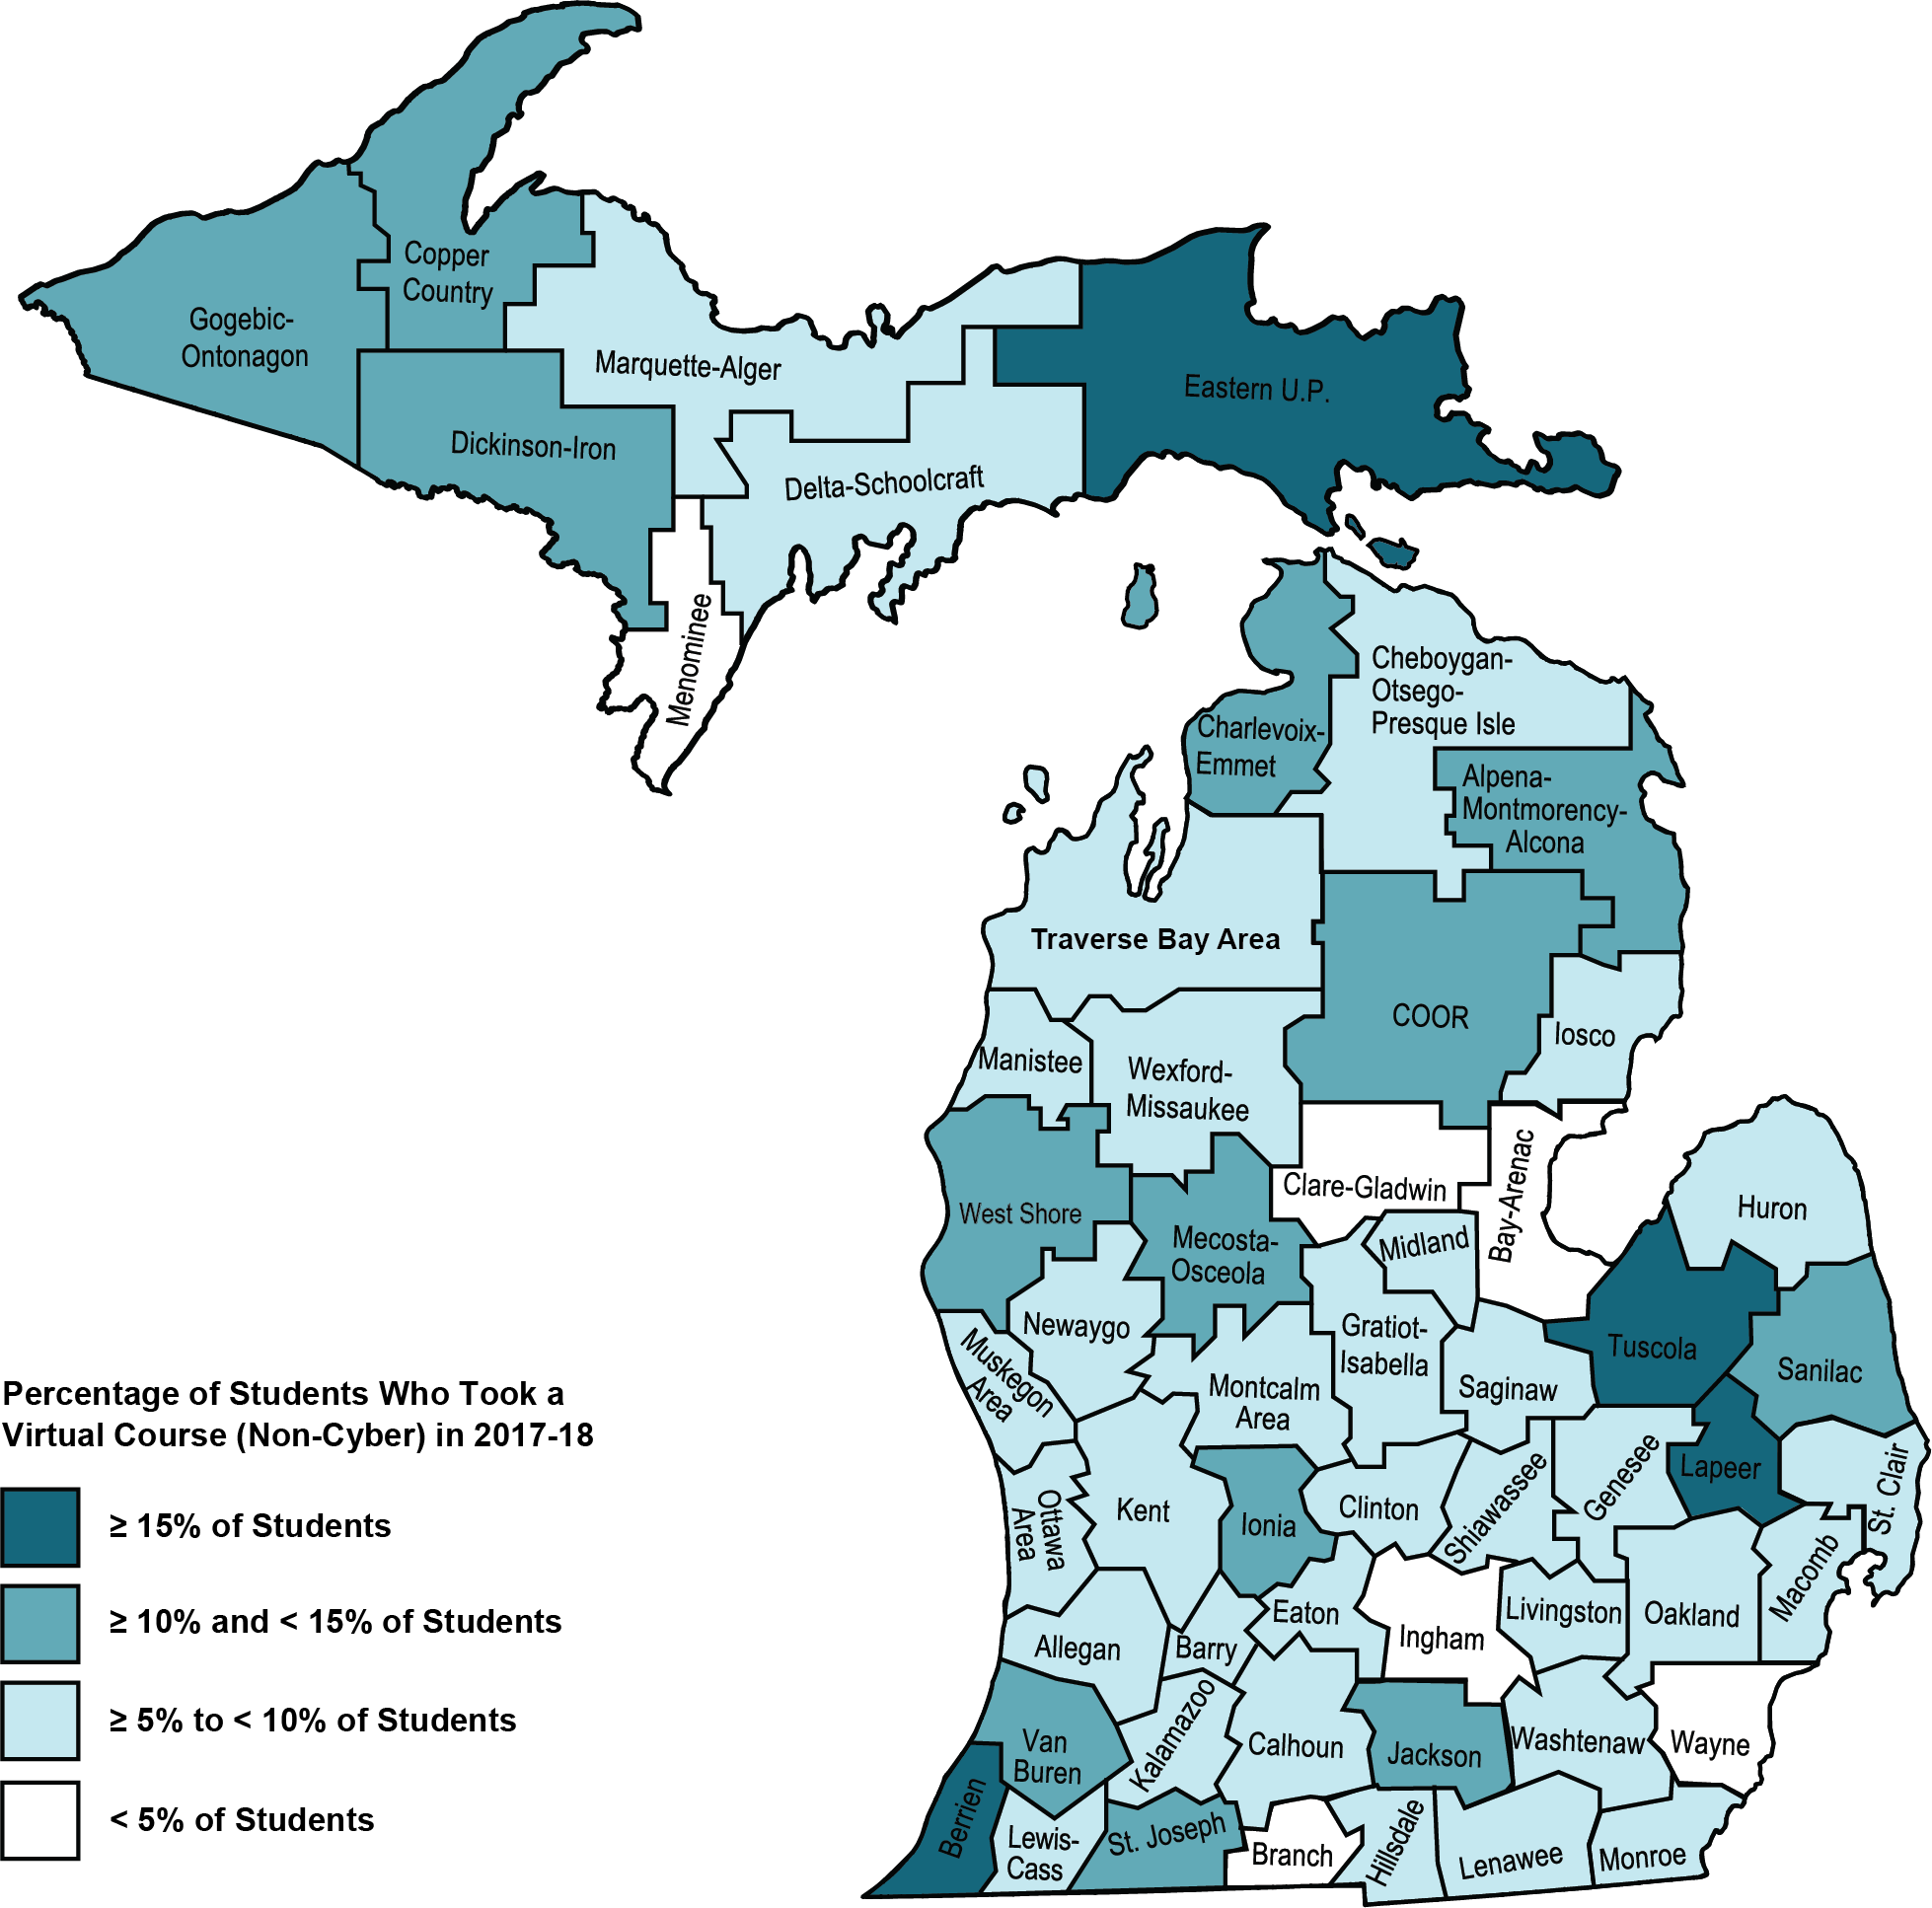 Map shows Michigan ISDs colored by the percentage of virtual courses. All but six counties have some color of blue meaning they have at least 5% of more of their students taking a virtual course (non-cyber) in 2017-18. In contrast, 17 ISDs had more than 10%; see the preceding paragraph for more detail.